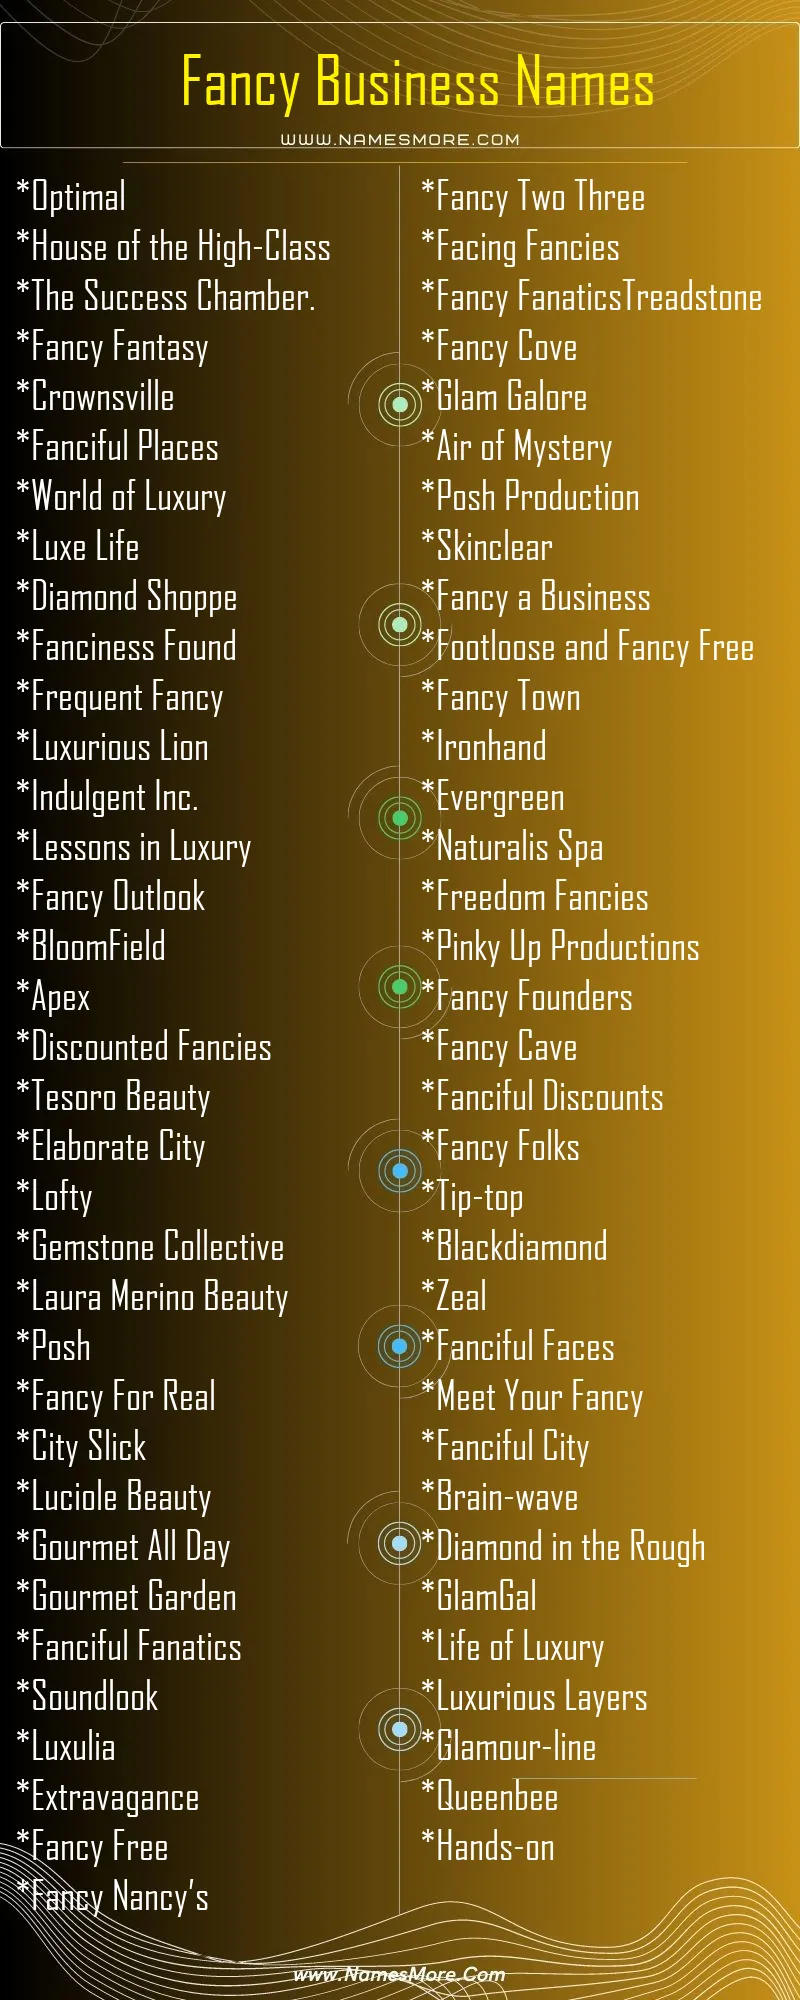 Fancy Business Names List Infographic